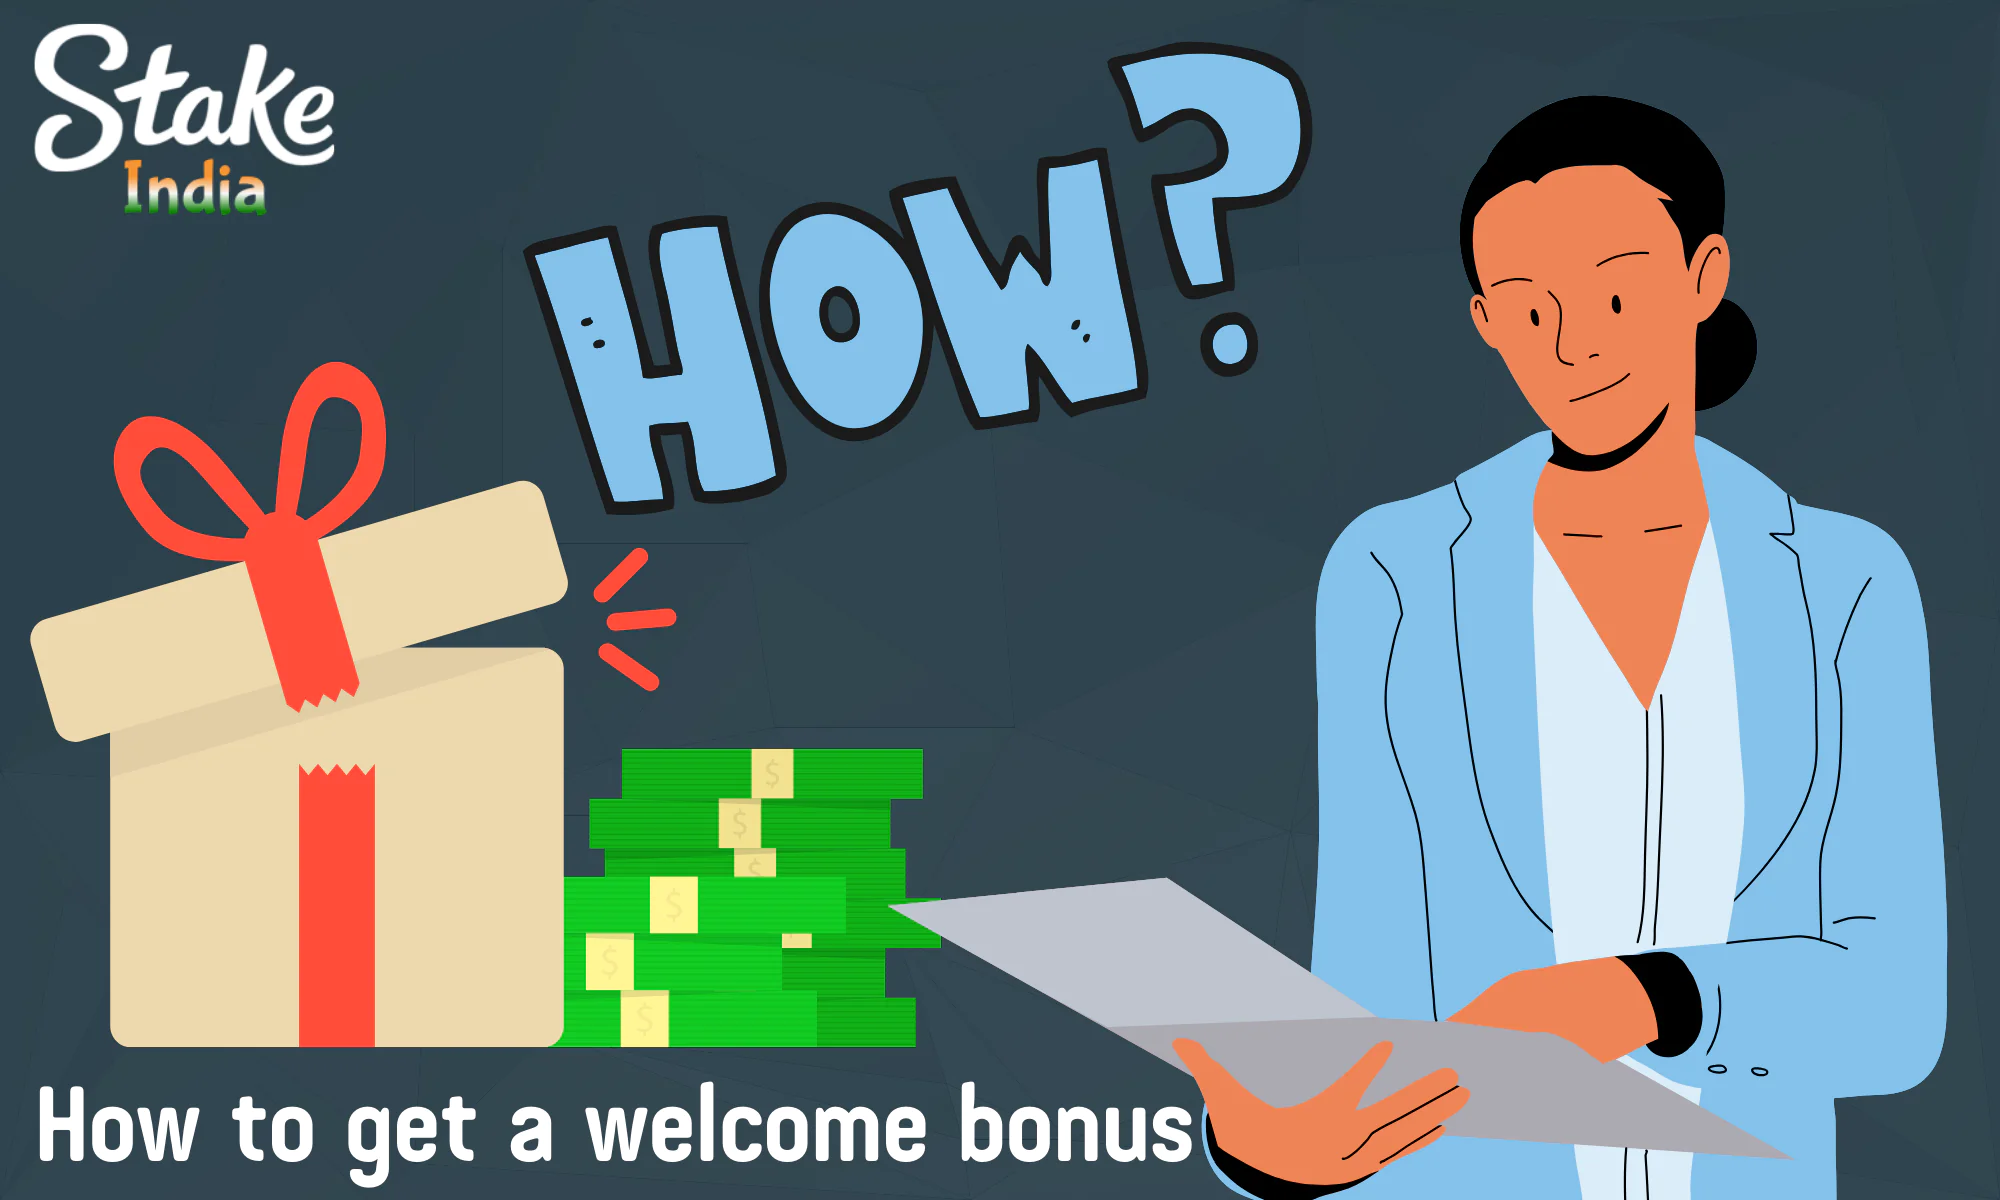 Step-by-step instructions on how to get welcome bonuses at Stake